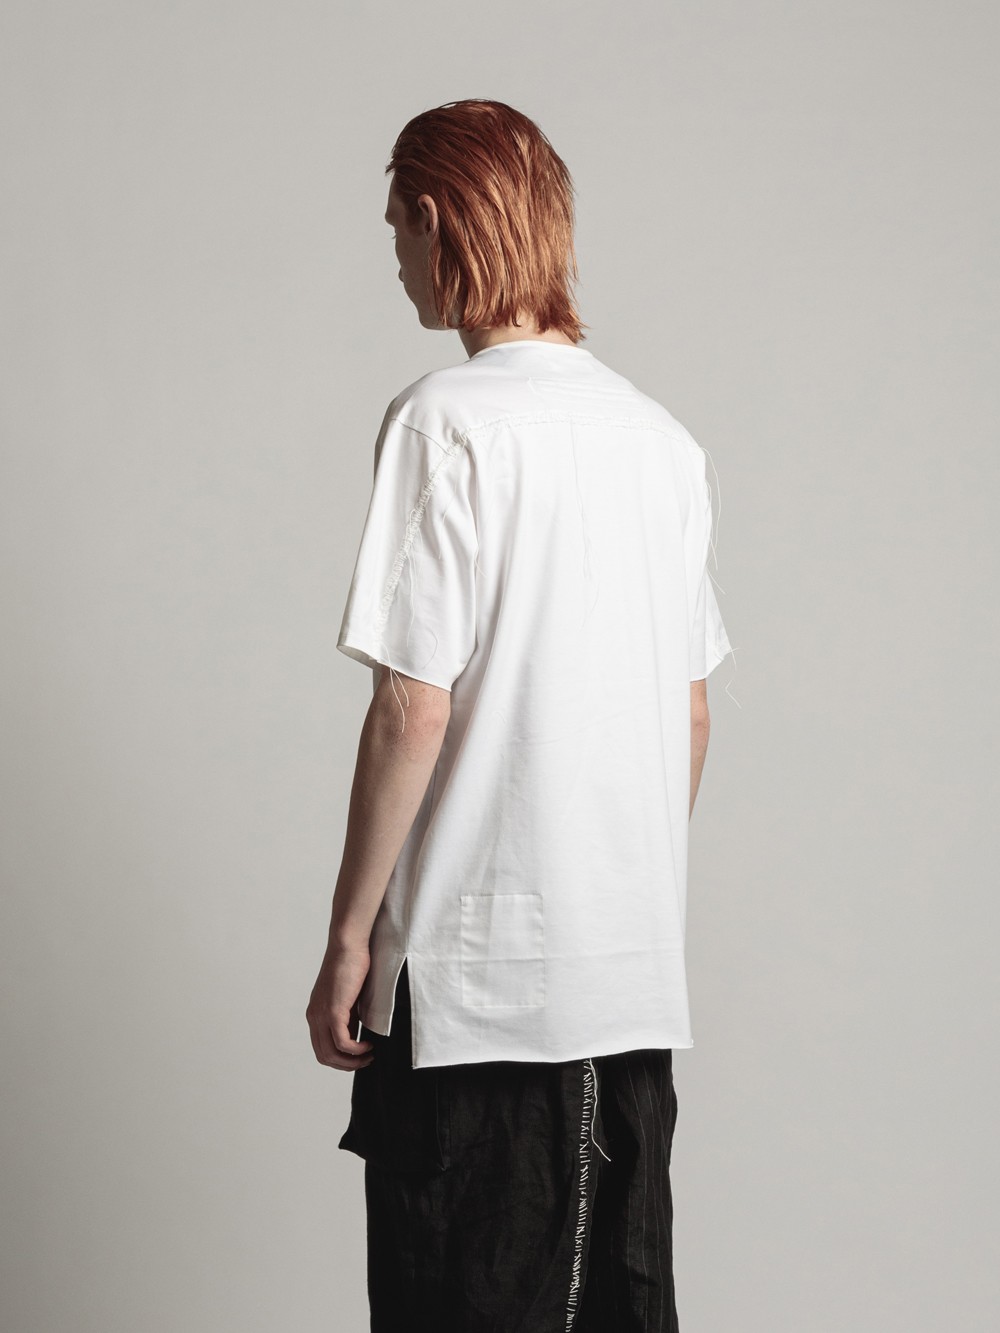 POCKT-EMBROIDERY TEE